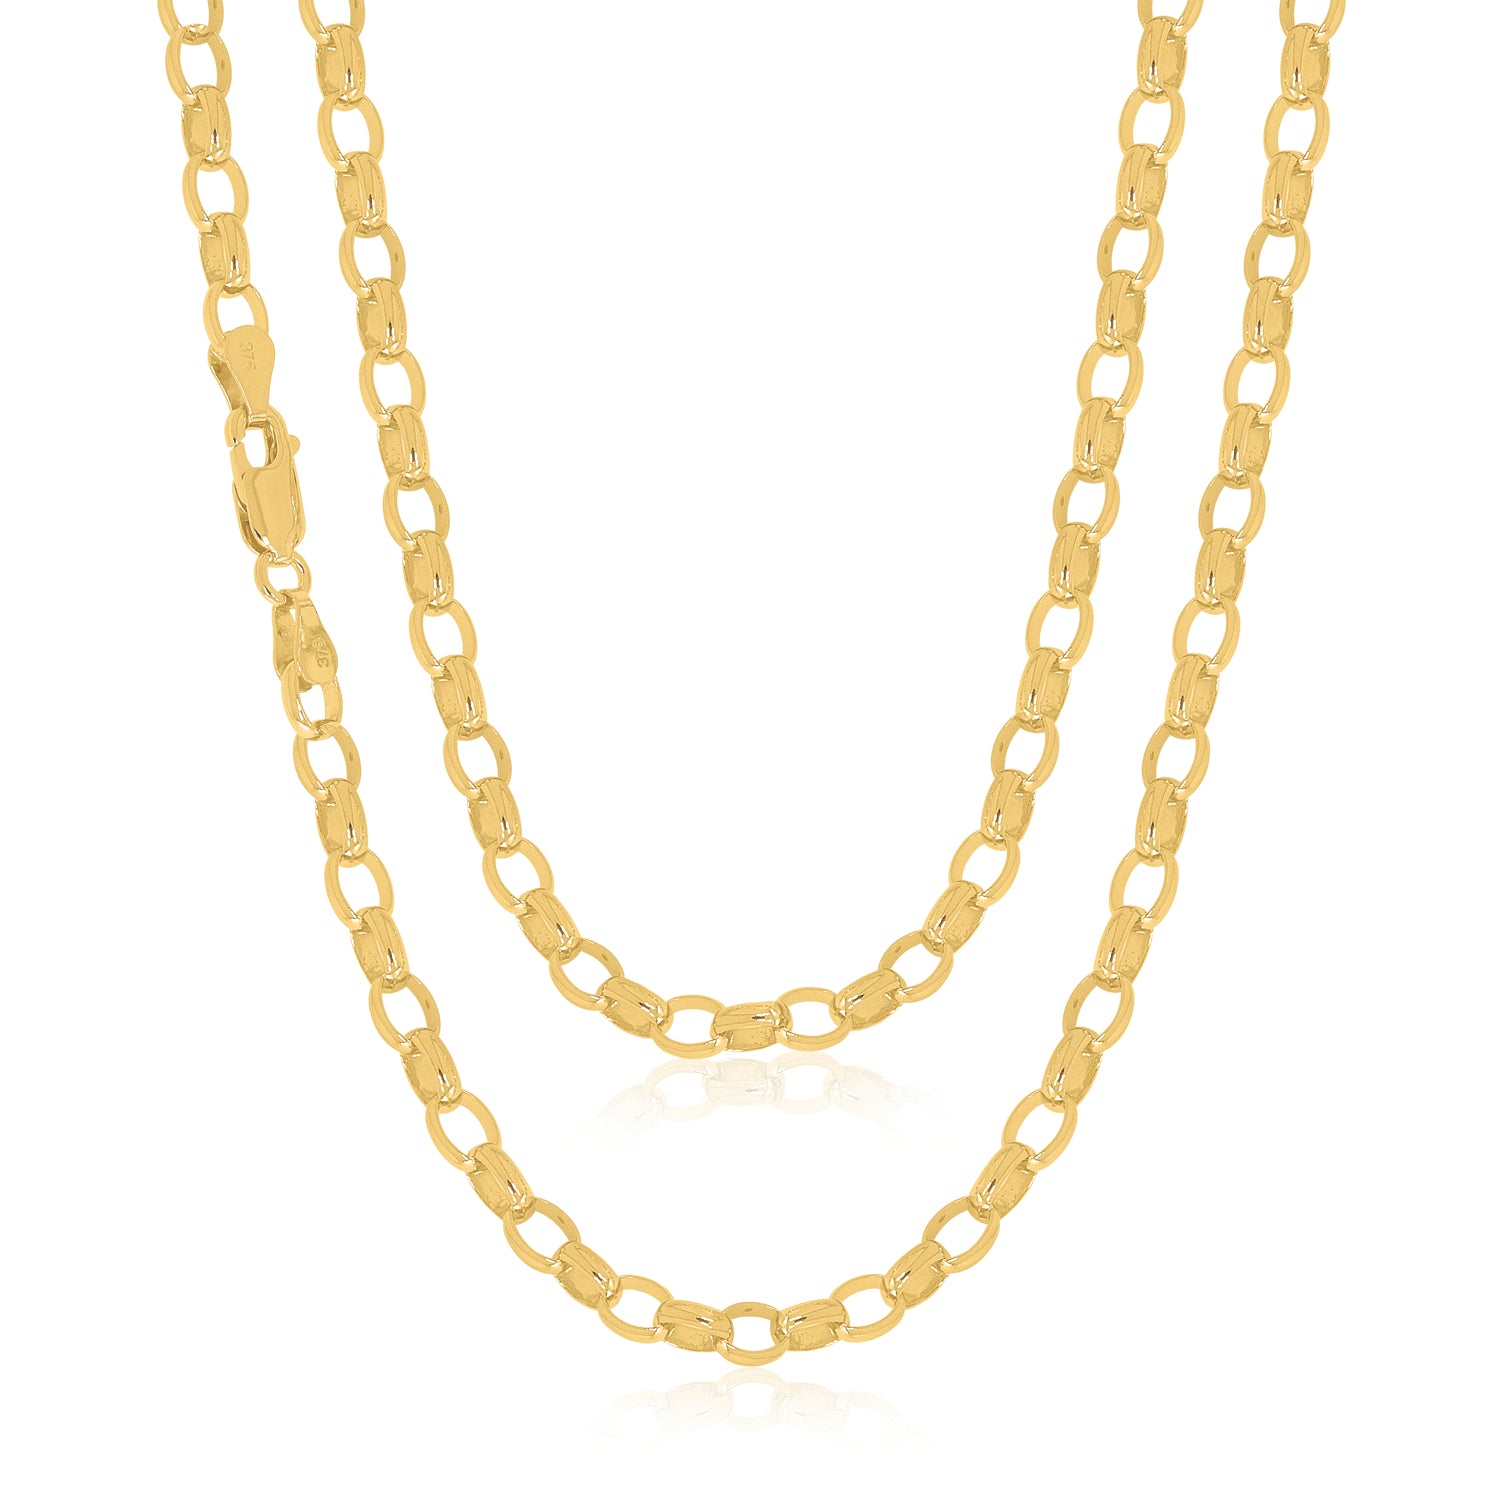 Small Belcher Chain with Dog Clip Clasp – Ashley Zhang Jewelry